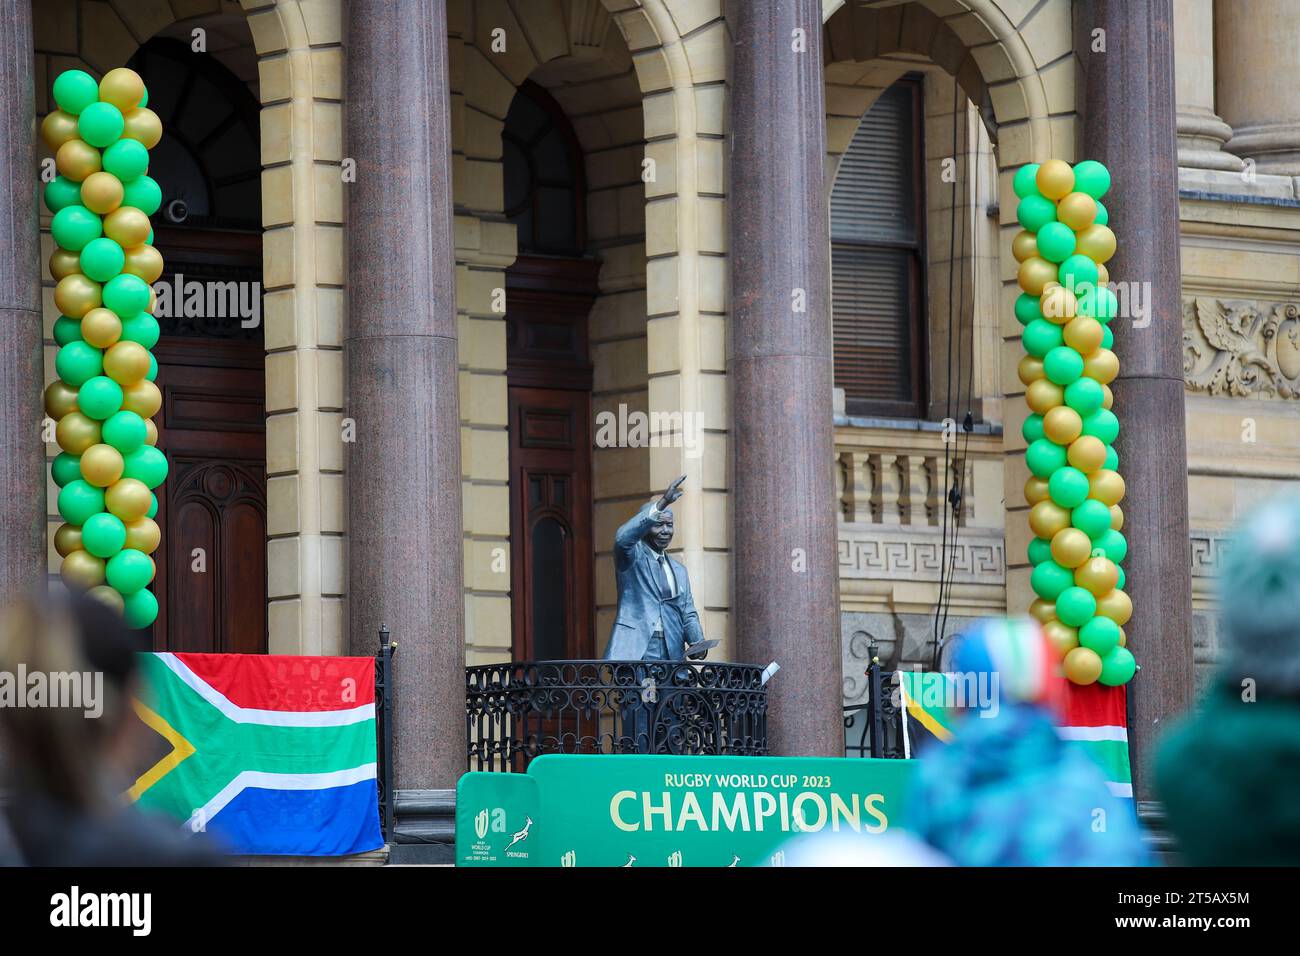 CAPE TOWN, SOUTH AFRICA - NOVEMBER 03: a statue of Nelson Mandela in front of the City during the Springbok Trophy tour in Cape Town on November 03, 2023 in Cape Town, South Africa. The Springboks beat the New Zealand All Blacks 12-11 to win the Rugby World Cup in Paris, France on Saturday 28 October 2023. (Photo by Roger Sedres) Stock Photo